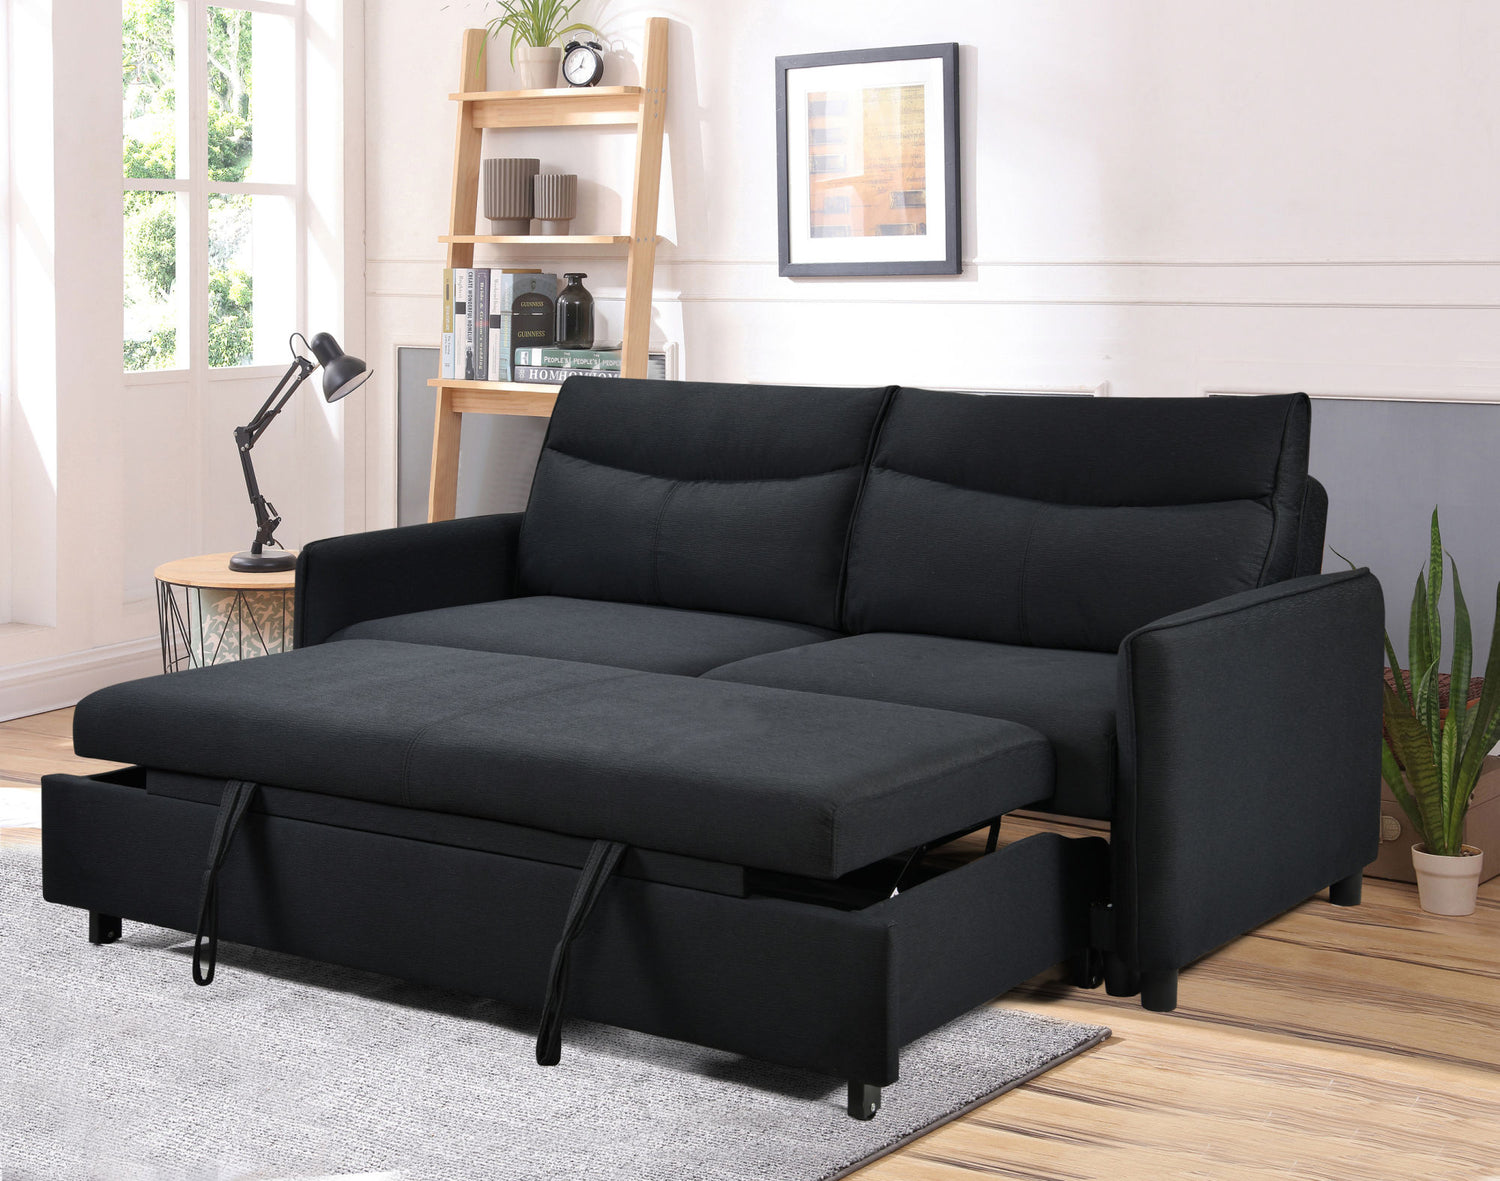 3 in 1 Convertible Sofa Bed